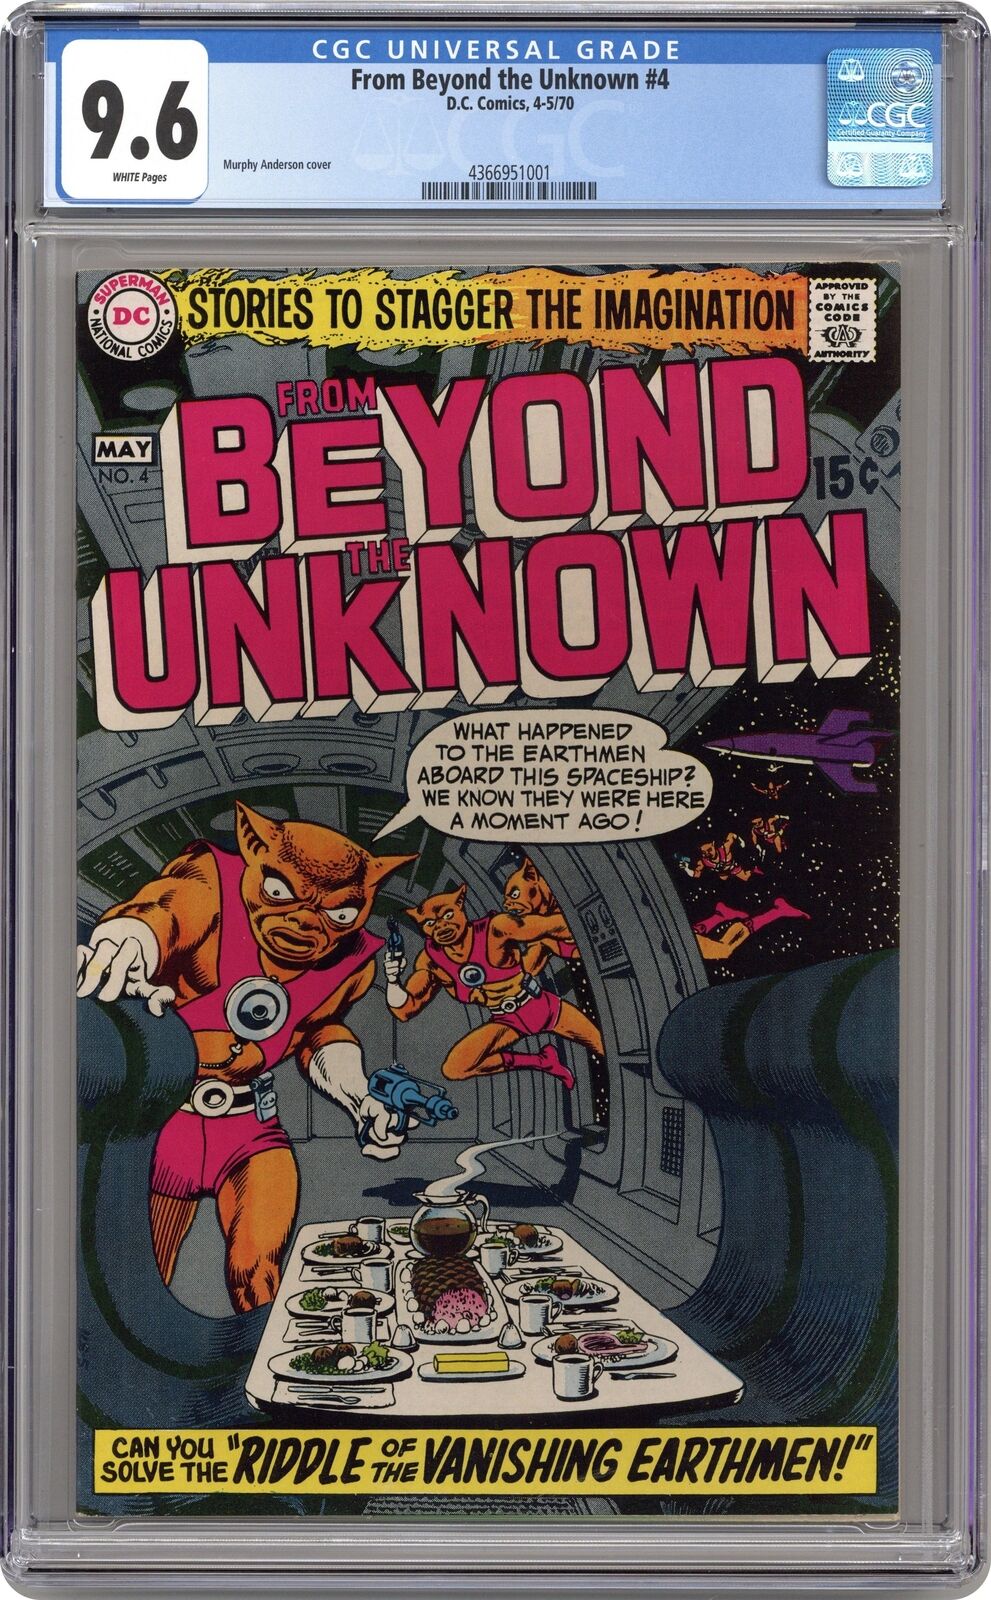 From Beyond the Unknown #4 CGC 9.6 1970 4366951001